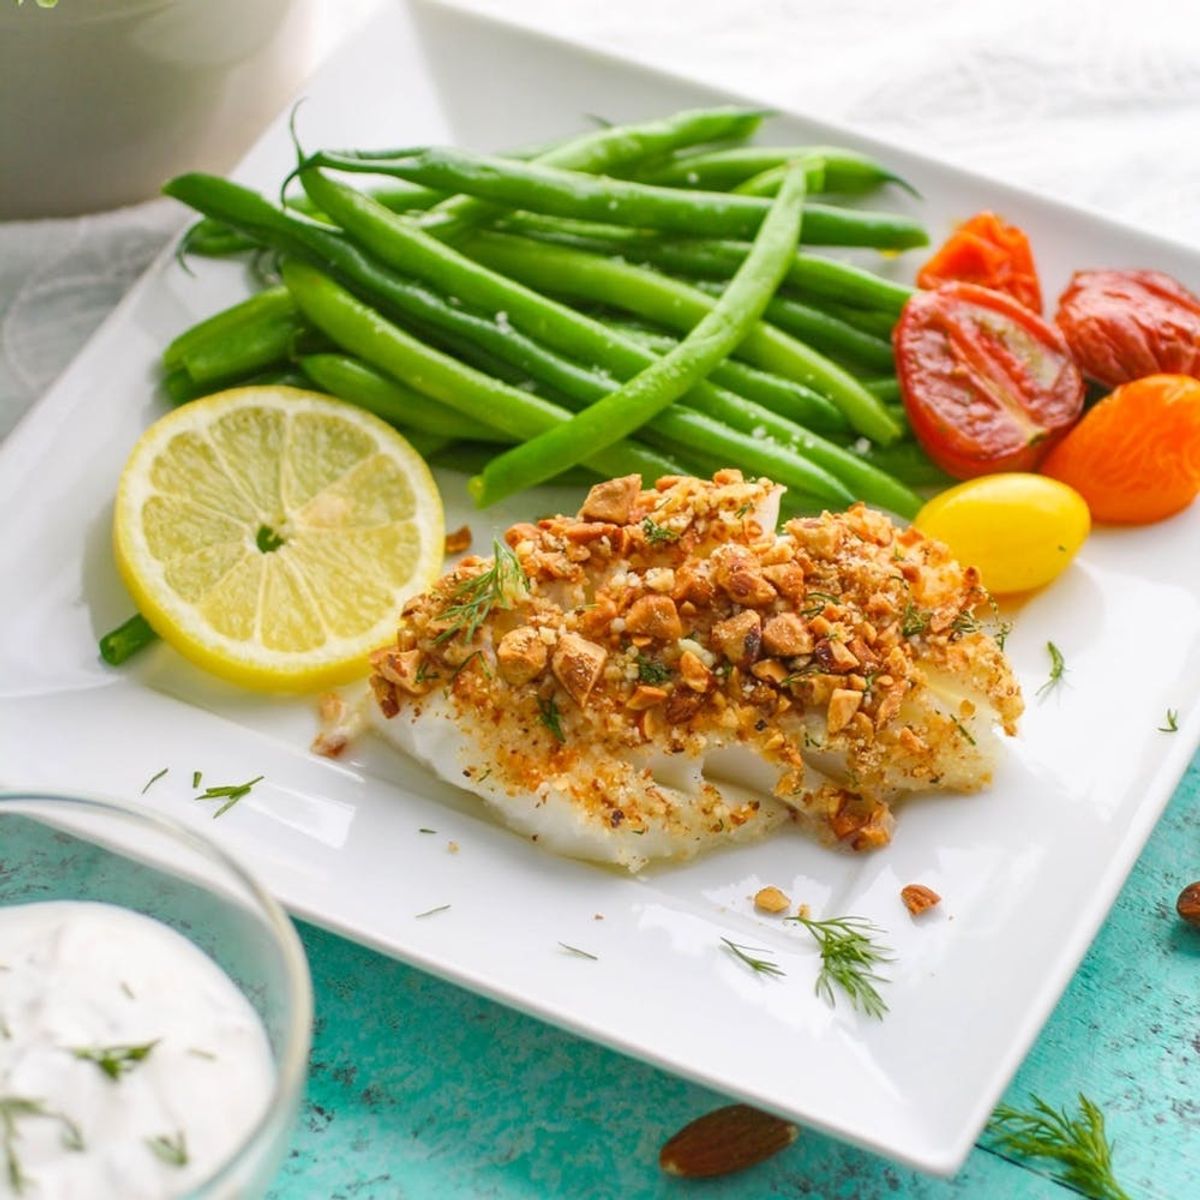 A Must-Make Lean-Protein Dinner: Try This Baked Almond-Crusted Cod Recipe